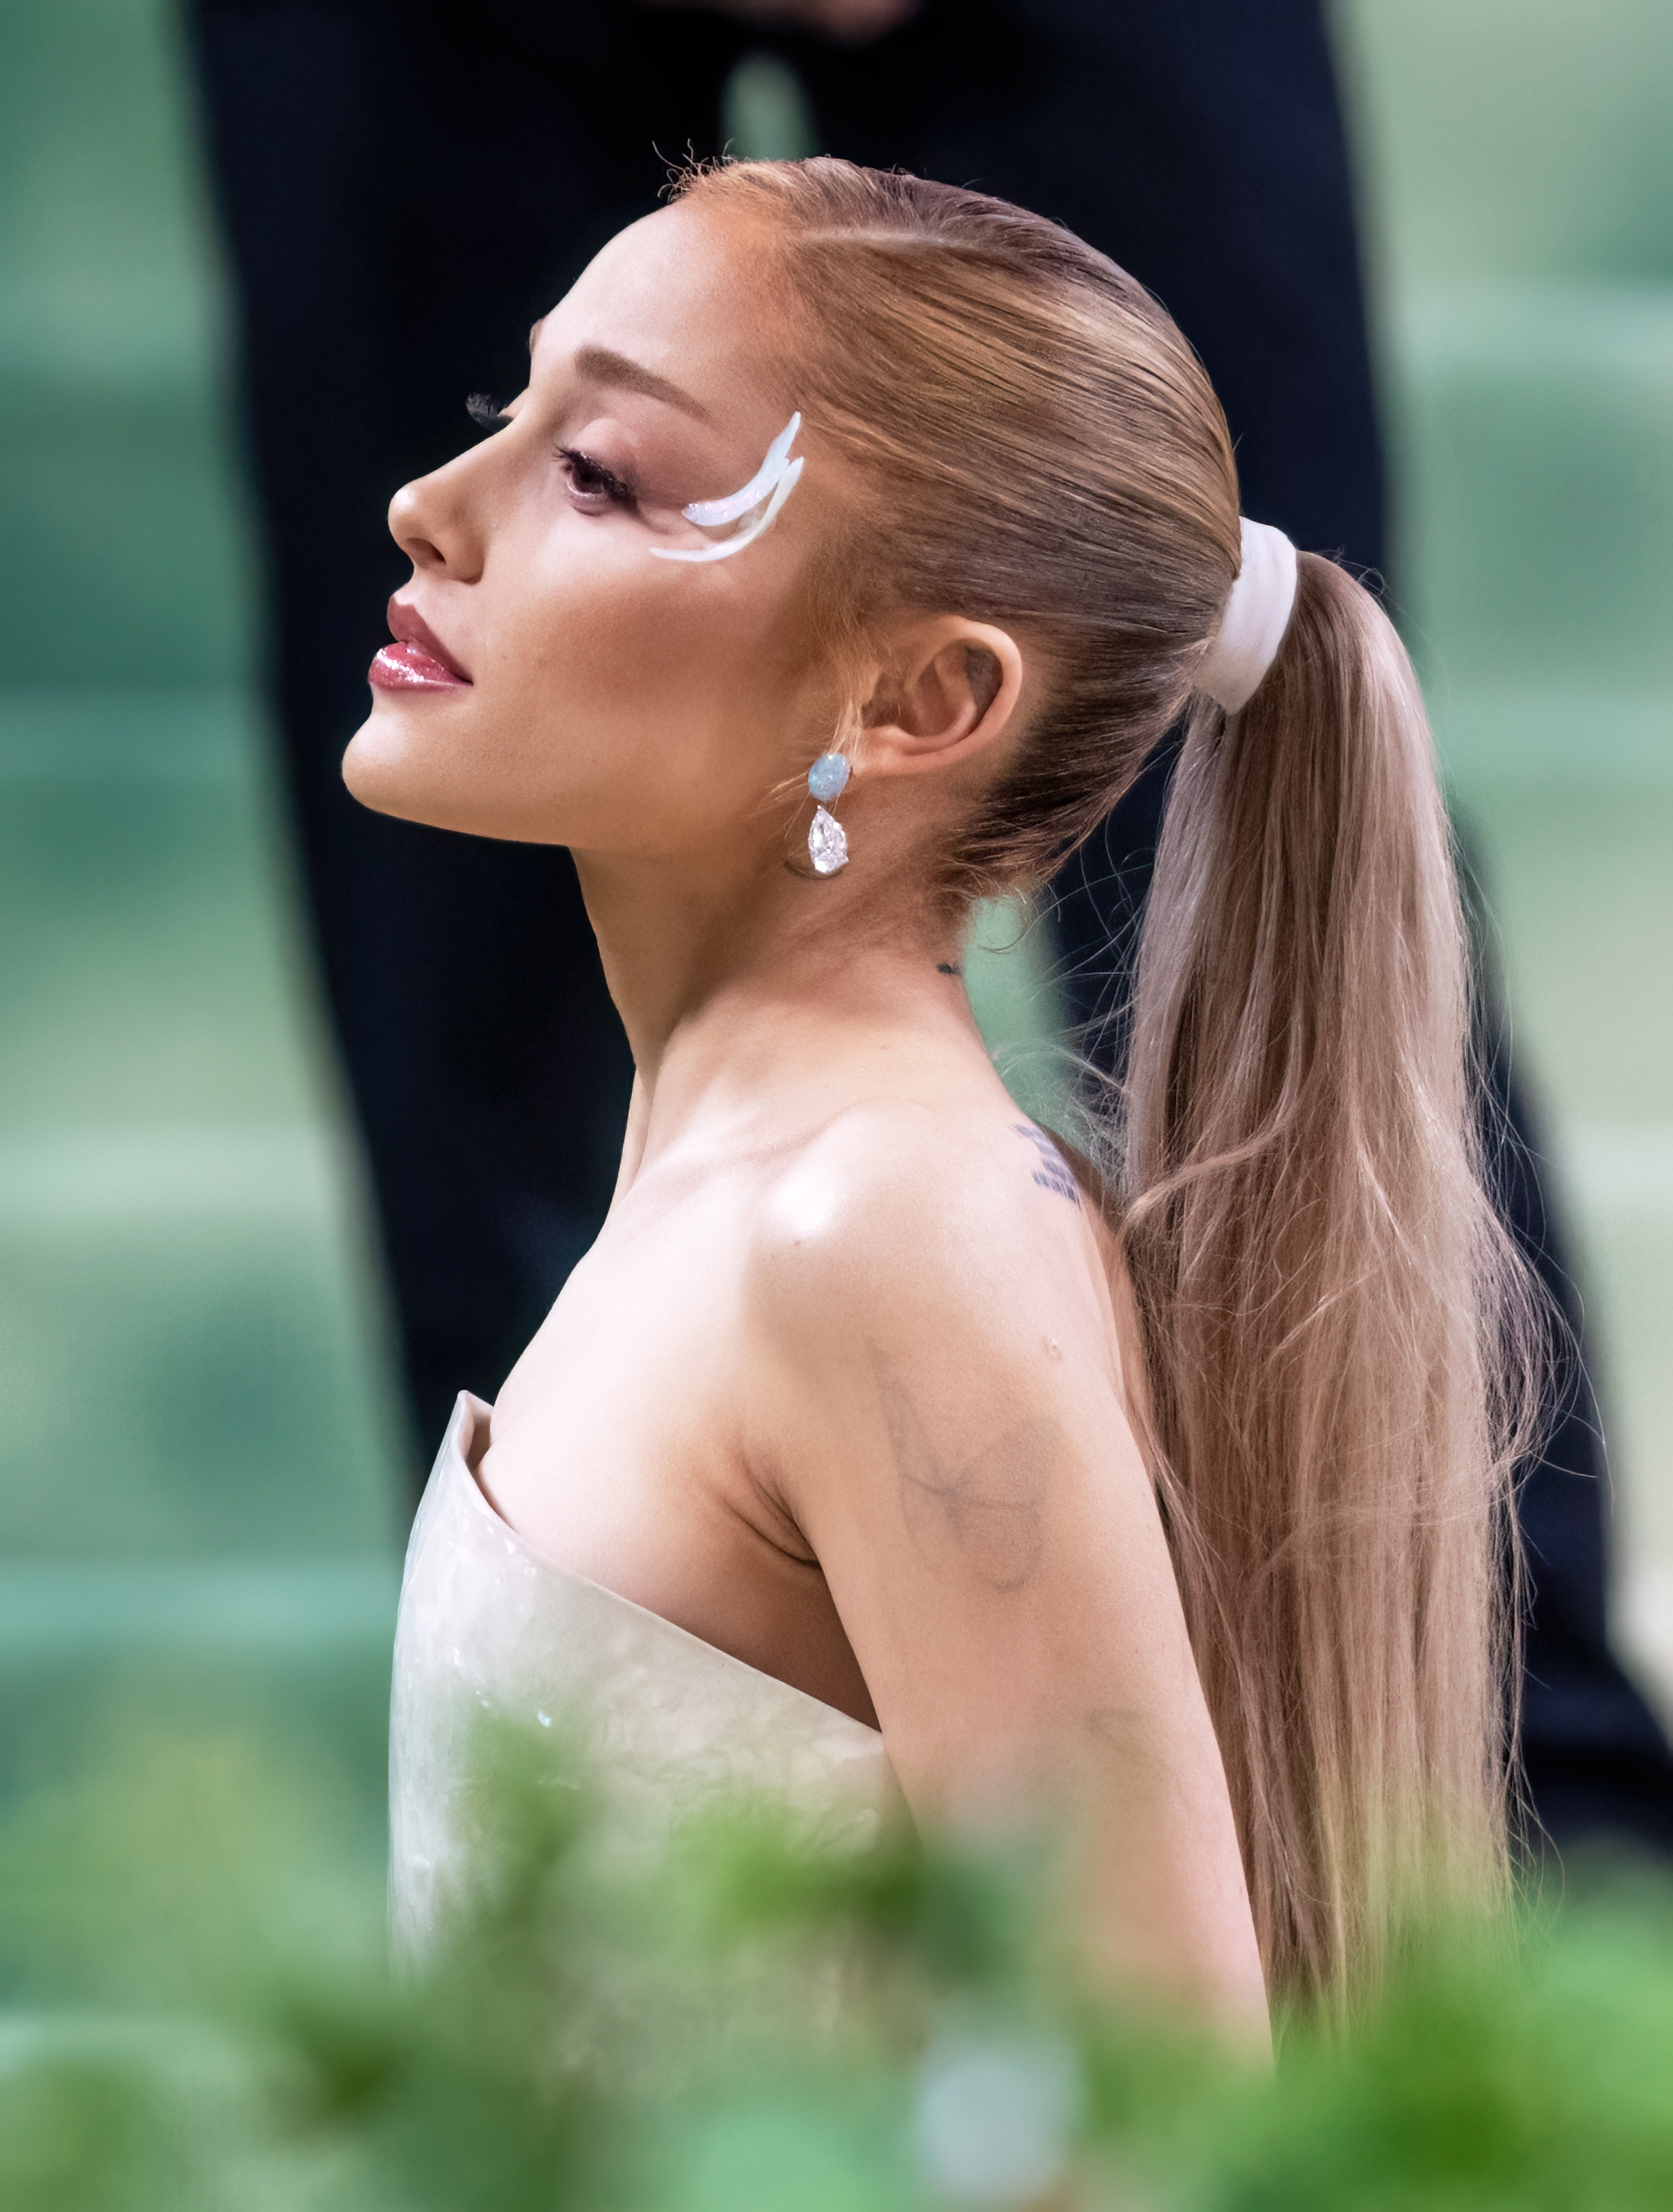 Ariana Grande at a public event; she wears an off-shoulder dress, long ponytail, and bright makeup with a bold winged eyeliner